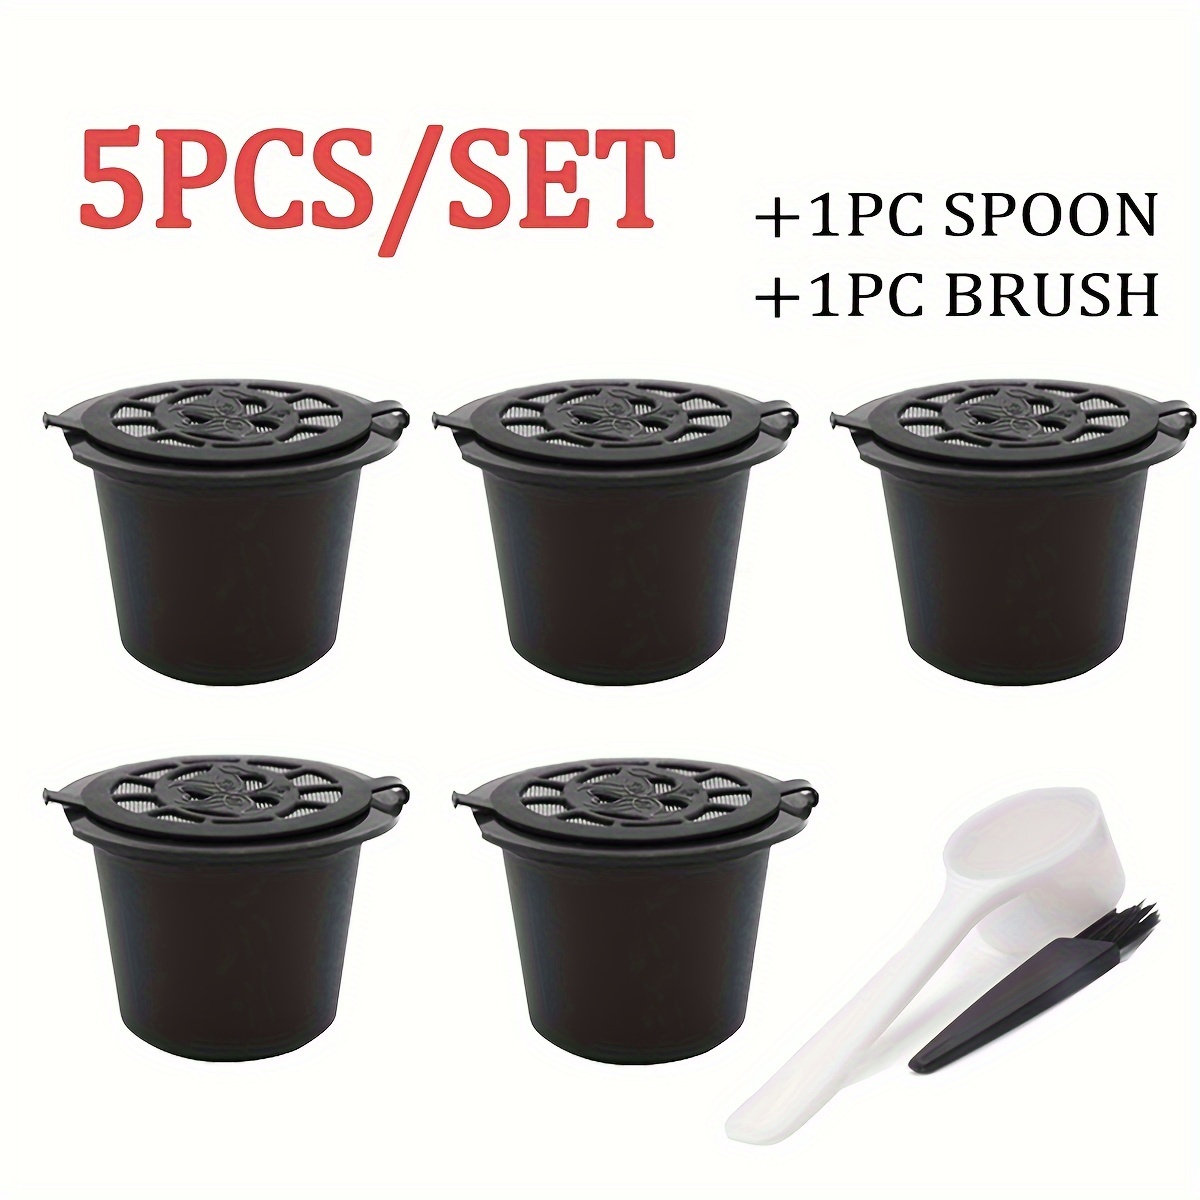 Refillable Coffee Capsule Filter with Spoon Brush Coffee Filter